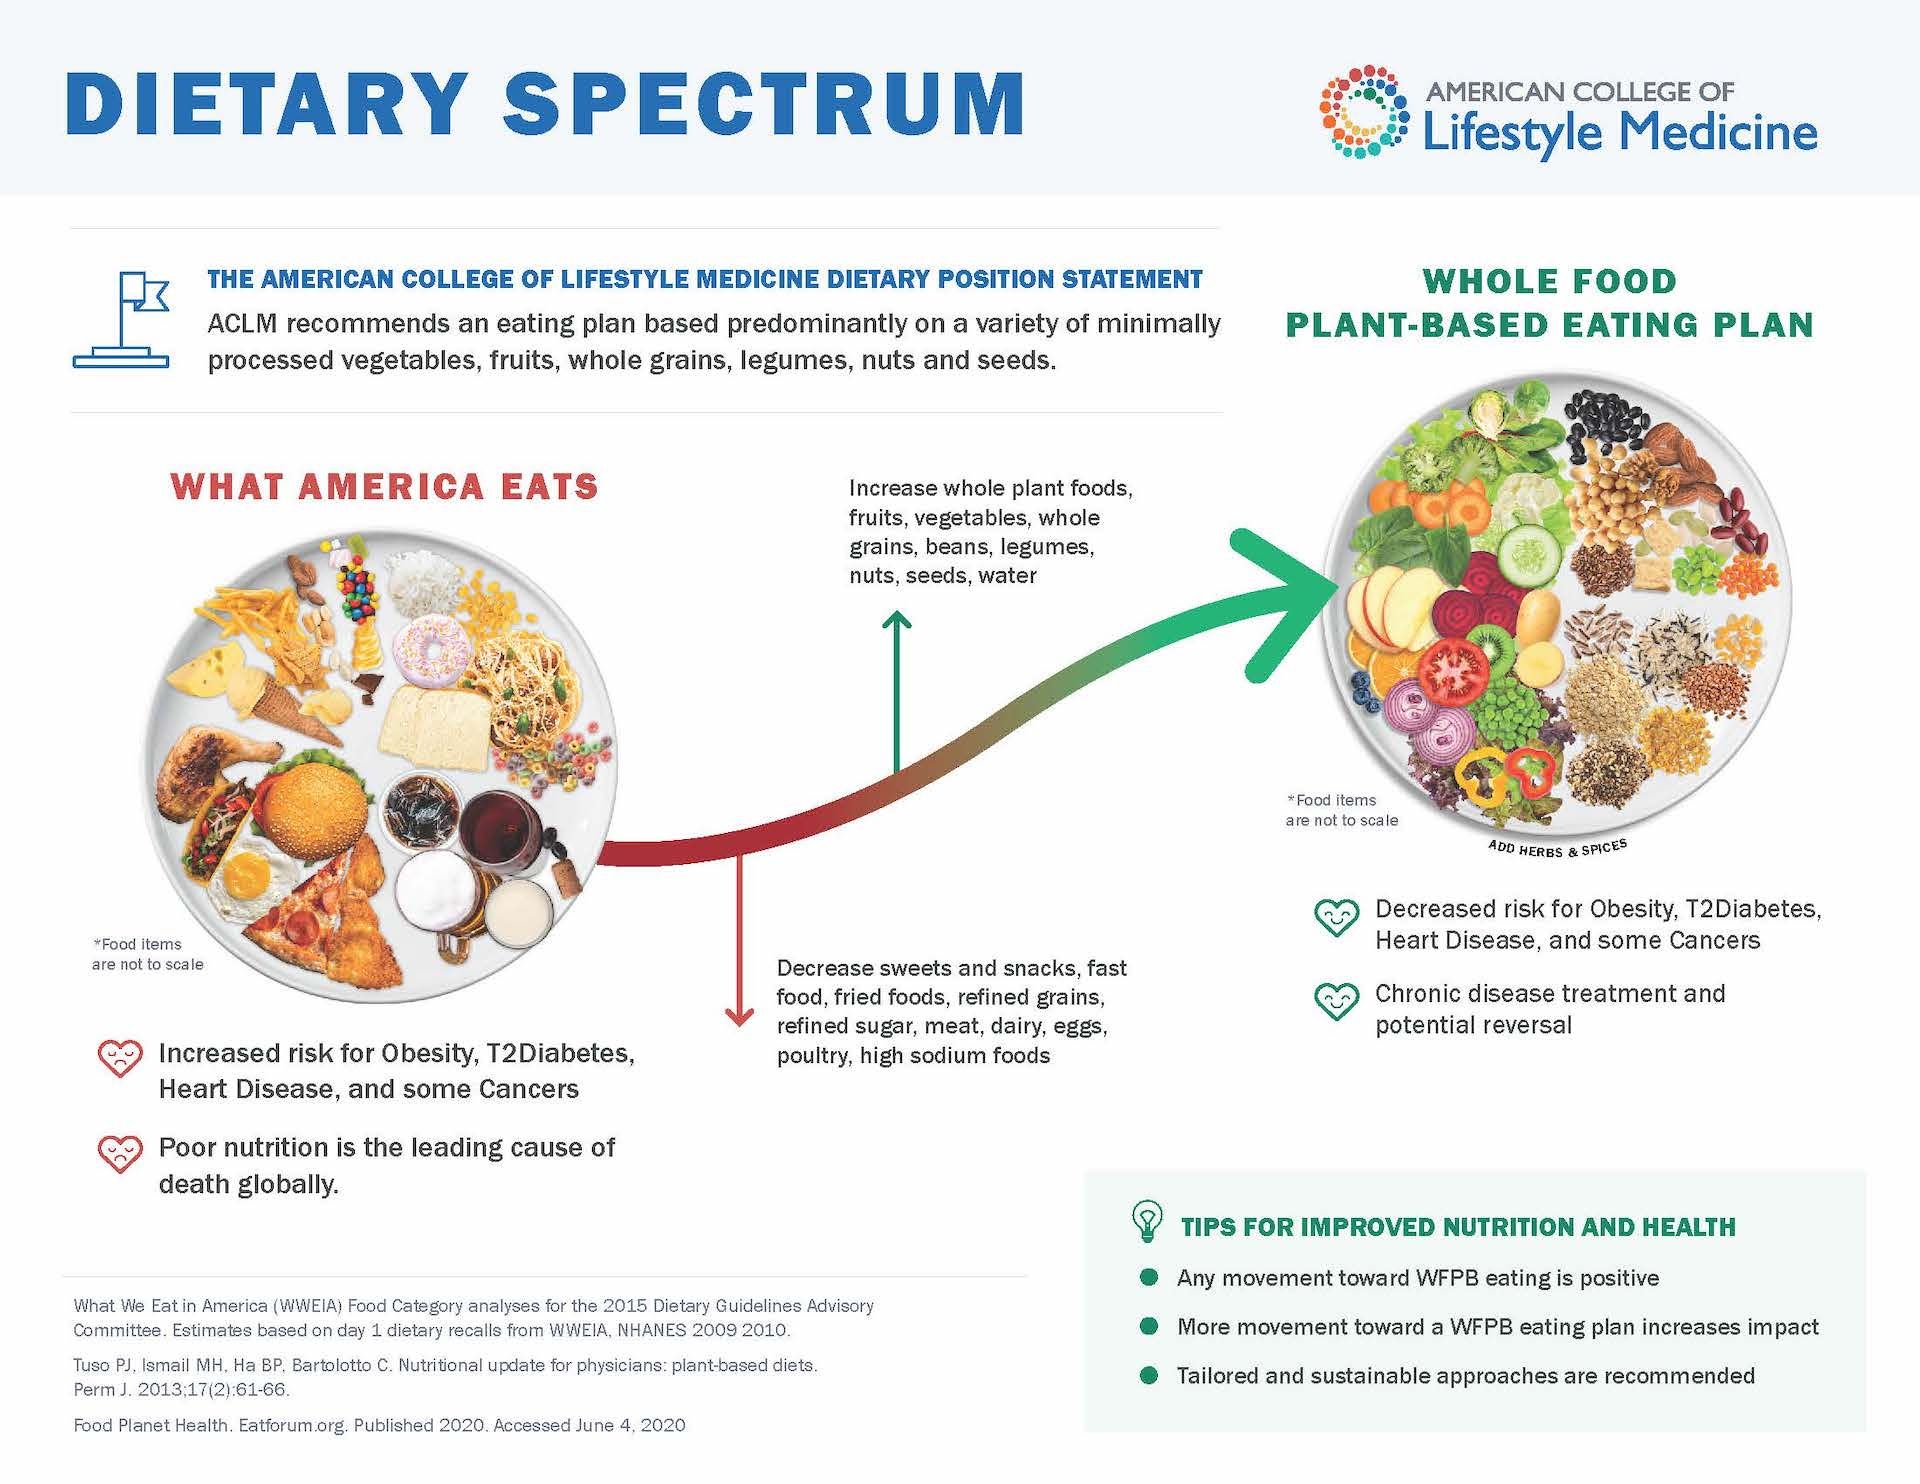 Dietary Spectrum of whole food plant-based eating plan